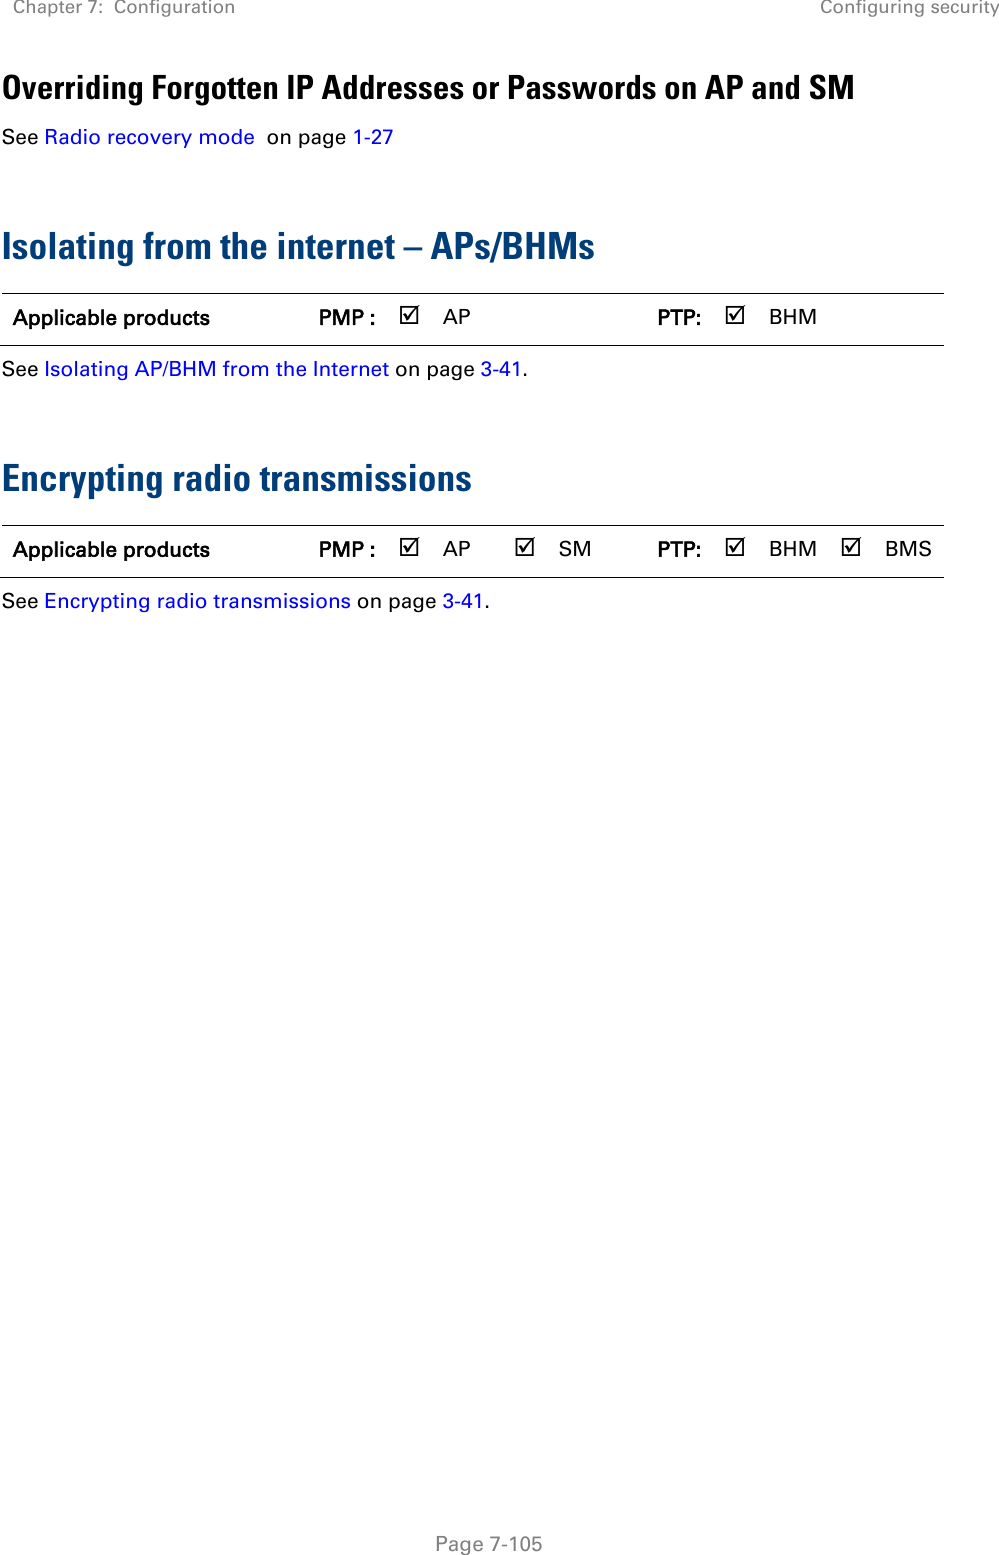 Chapter 7:  Configuration Configuring security   Page 7-105 Overriding Forgotten IP Addresses or Passwords on AP and SM See Radio recovery mode  on page 1-27   Isolating from the internet – APs/BHMs Applicable products PMP :  AP   PTP:  BHM   See Isolating AP/BHM from the Internet on page 3-41.  Encrypting radio transmissions Applicable products PMP :  AP  SM PTP:  BHM  BMS See Encrypting radio transmissions on page 3-41.    